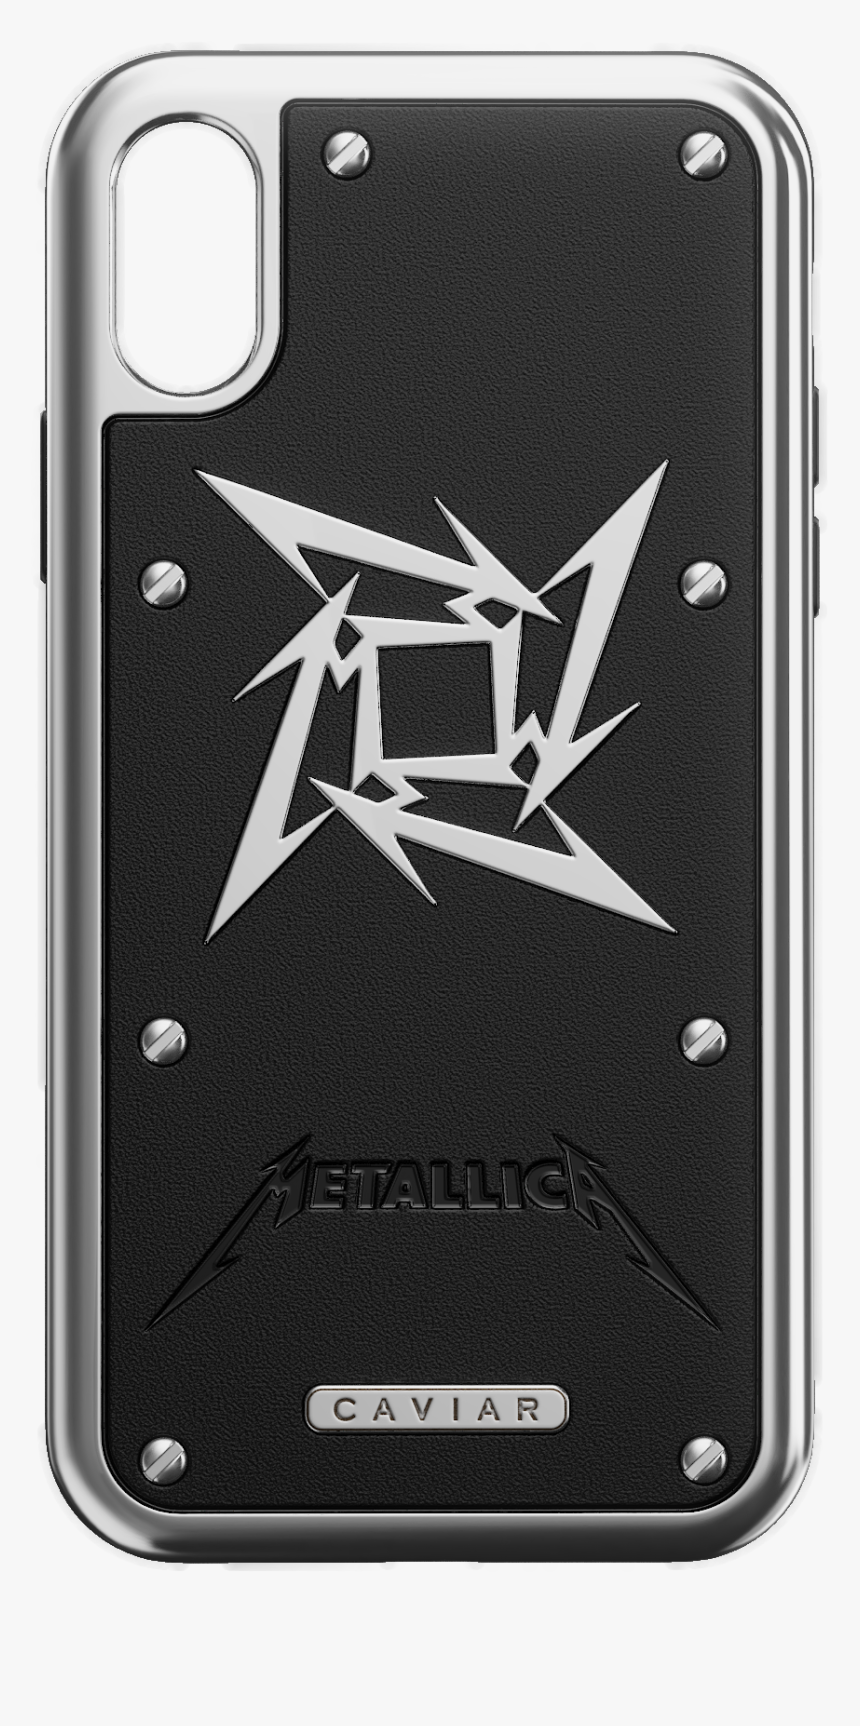 Buy Metallica Iphone X Cover - Caviar Iphone Case, HD Png Download, Free Download